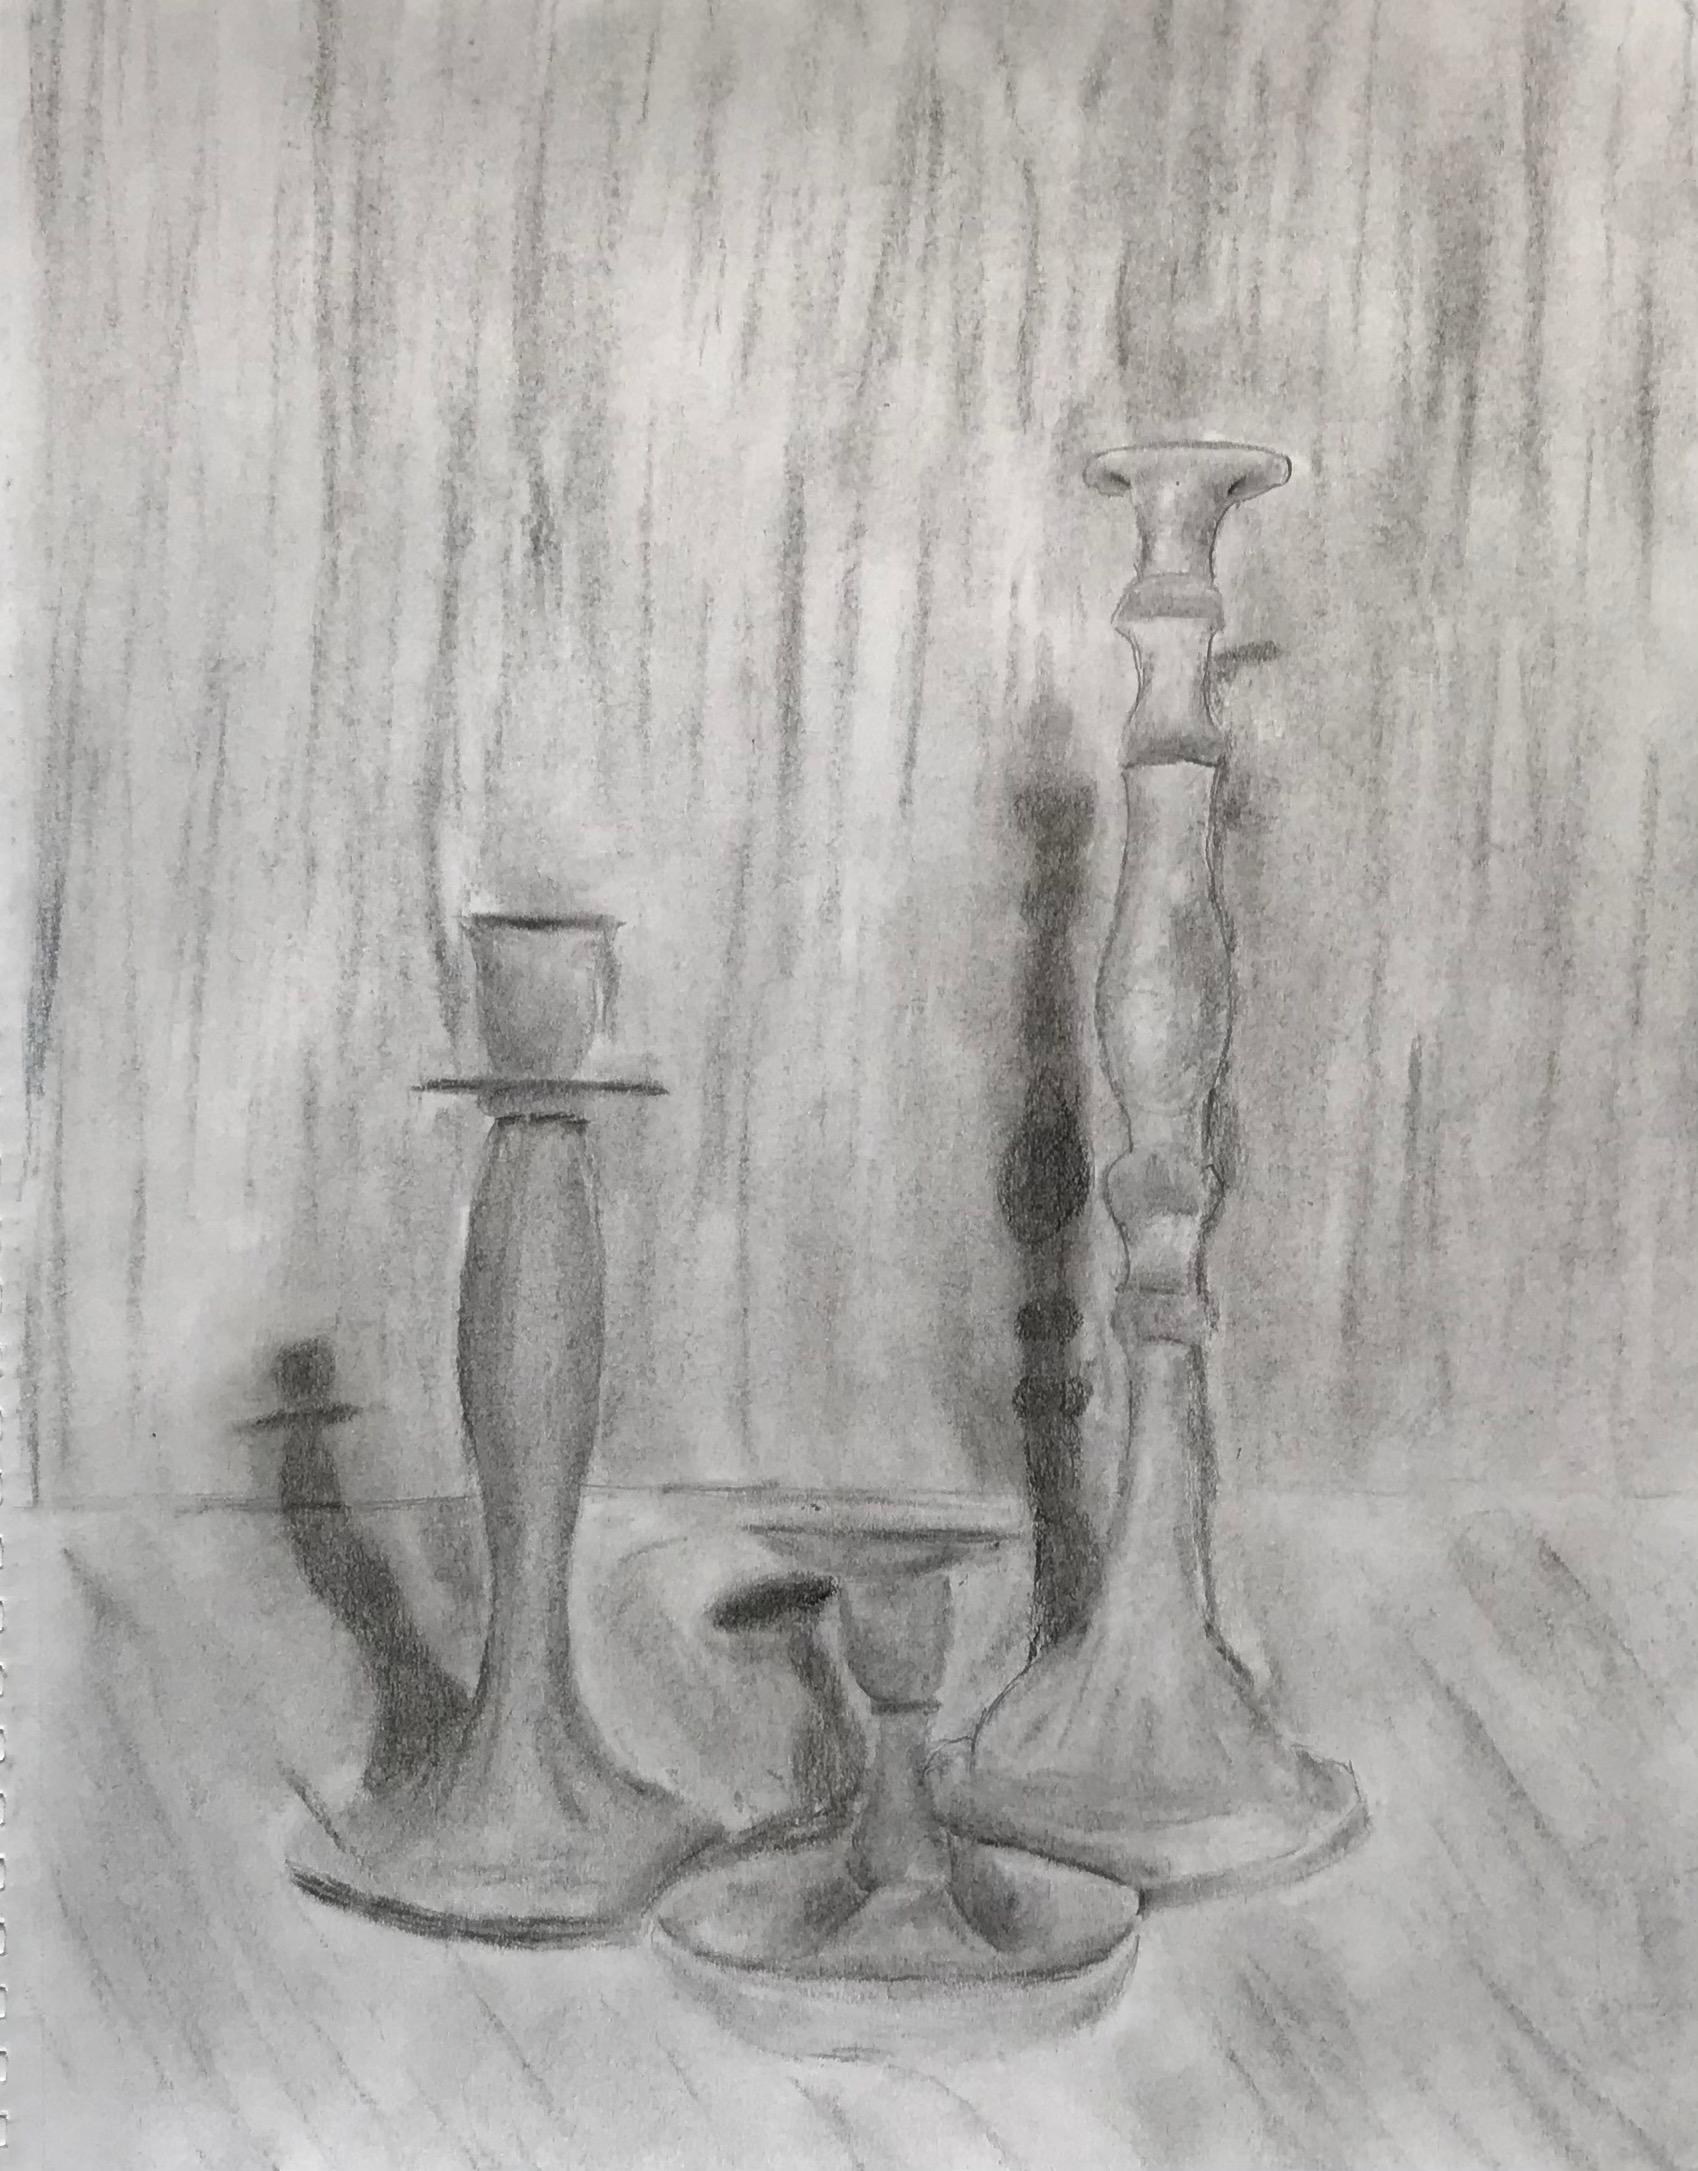 Tyler Windham’s Still Life with Candles